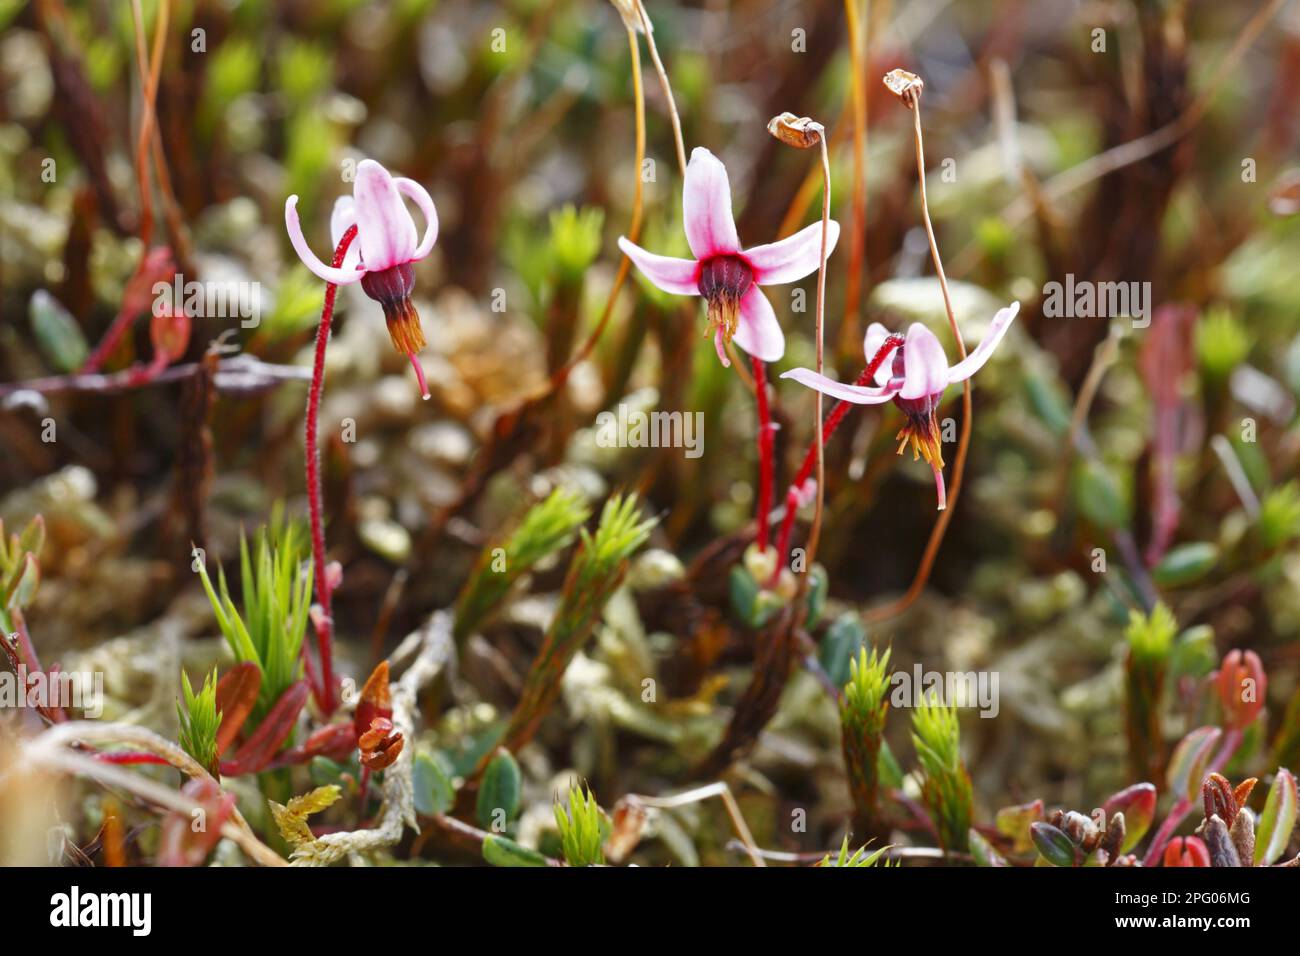 Oxycoccus palustris, small cranberry (Vaccinium oxycoccos), heather family, Common cranberry (Vaccinium oxycoccus) flowering, growing in upland peat Stock Photo